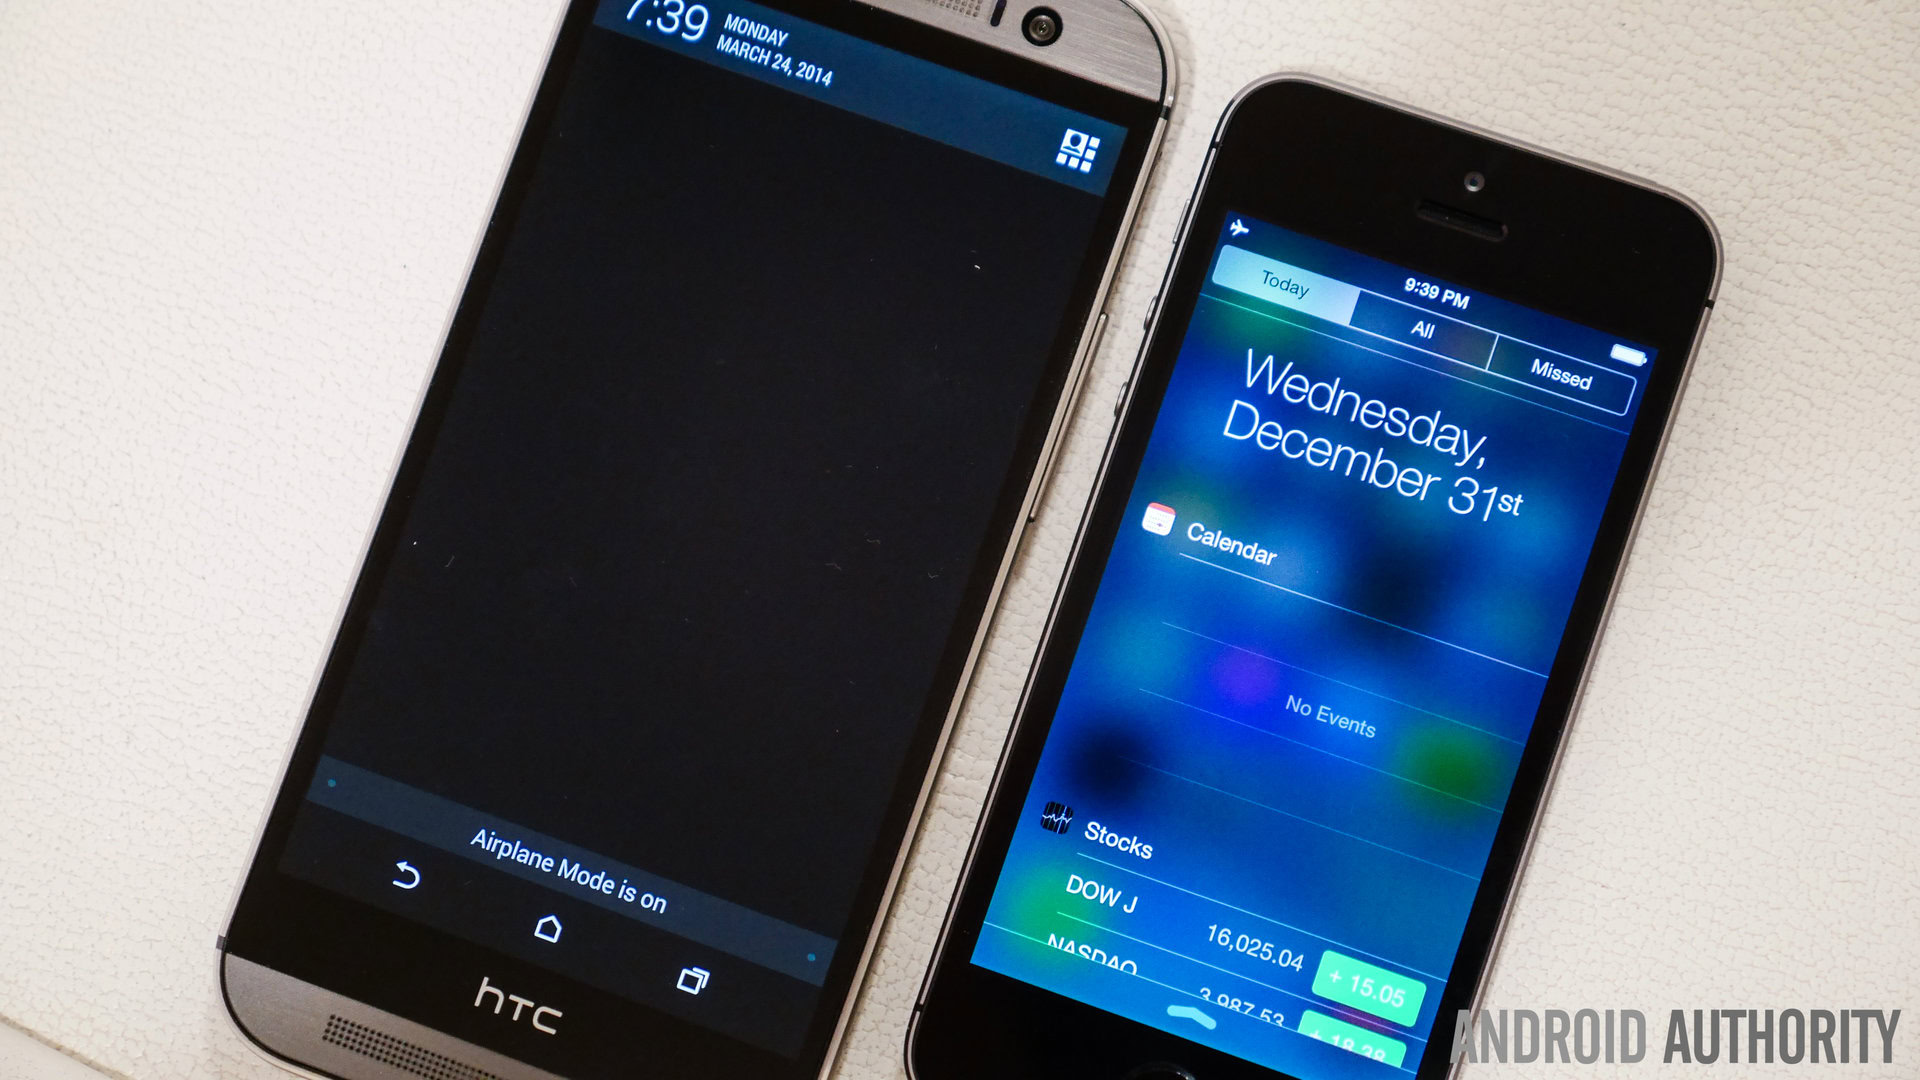 htc one m8 vs iphone 5s quick look aa (14 of 15)